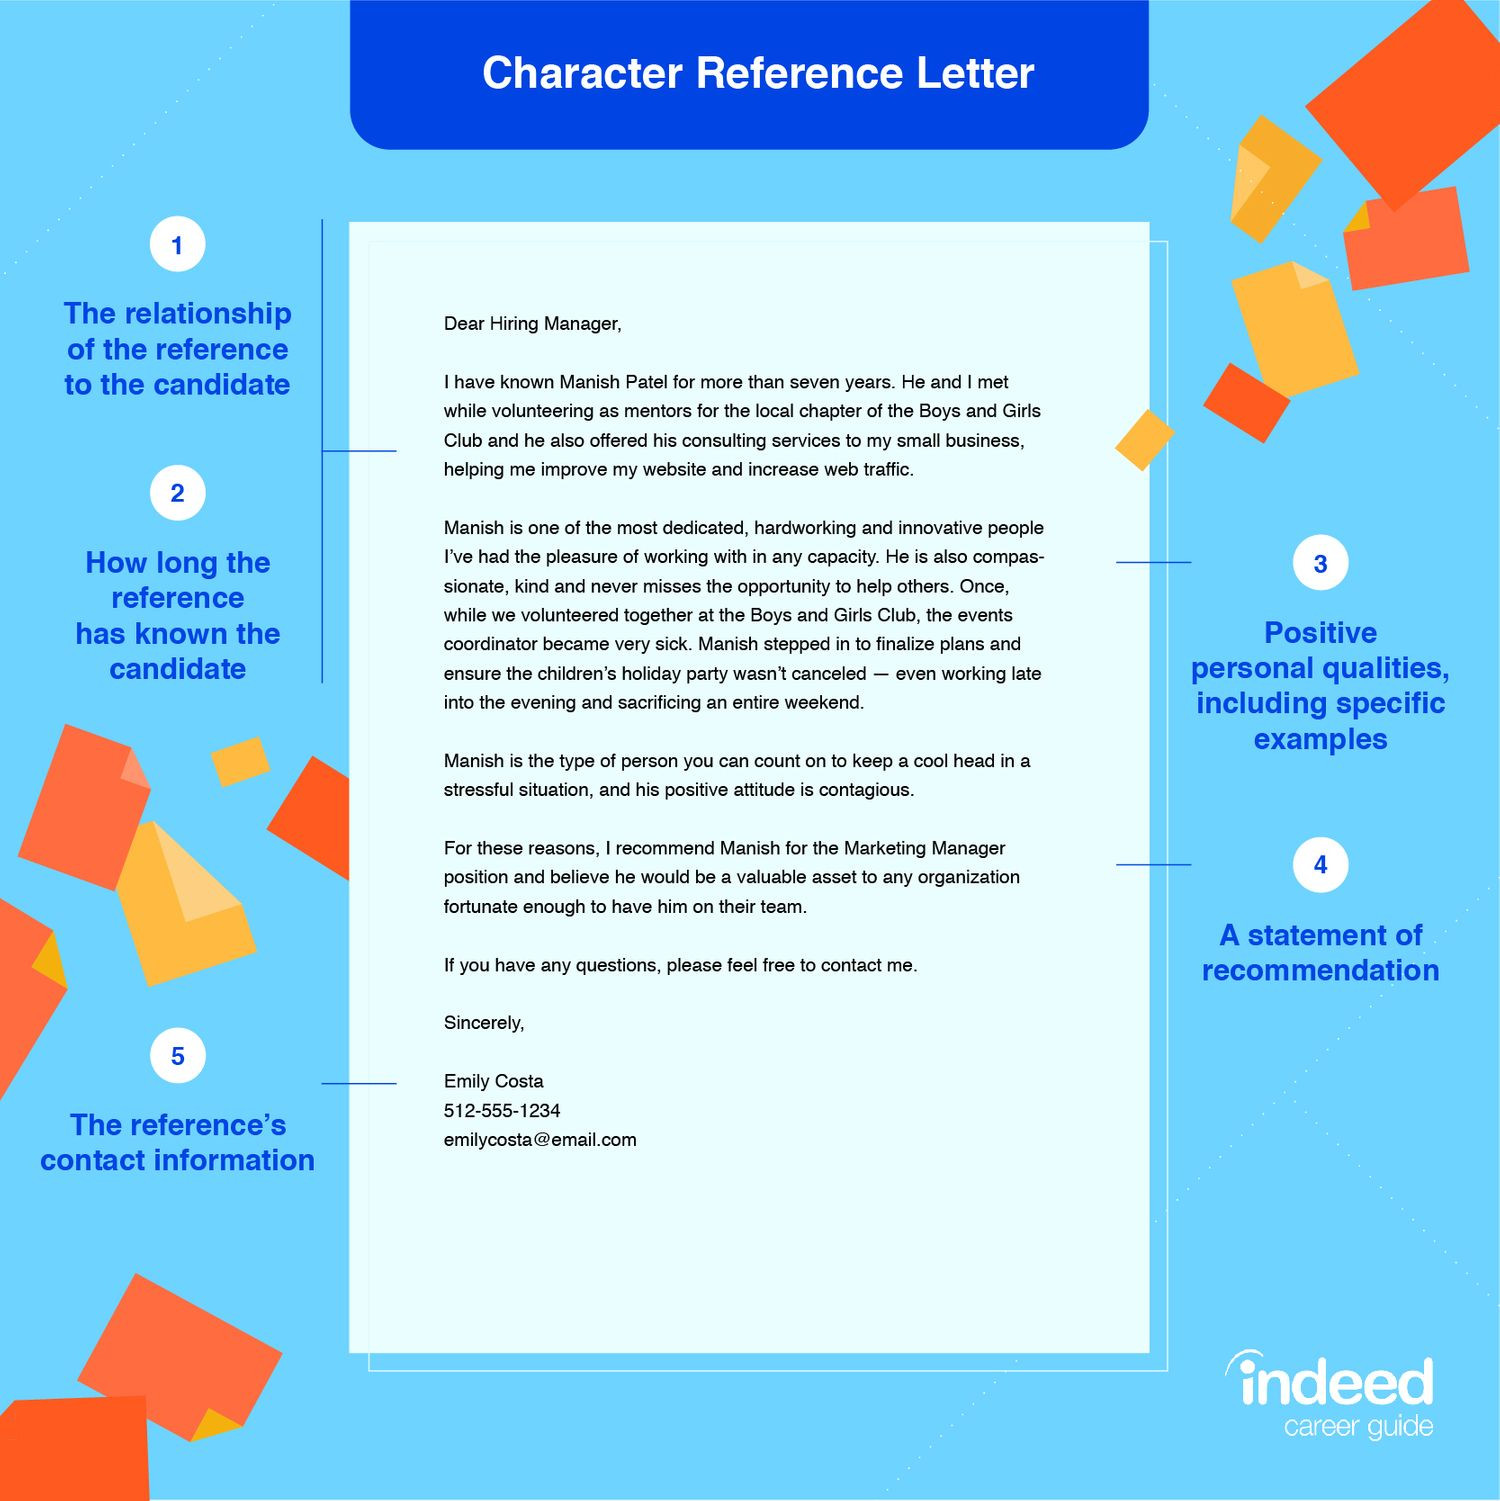 Sample Letter for Sending Resume to Friend How to Write A Recommendation Letter for A Friend Indeed.com